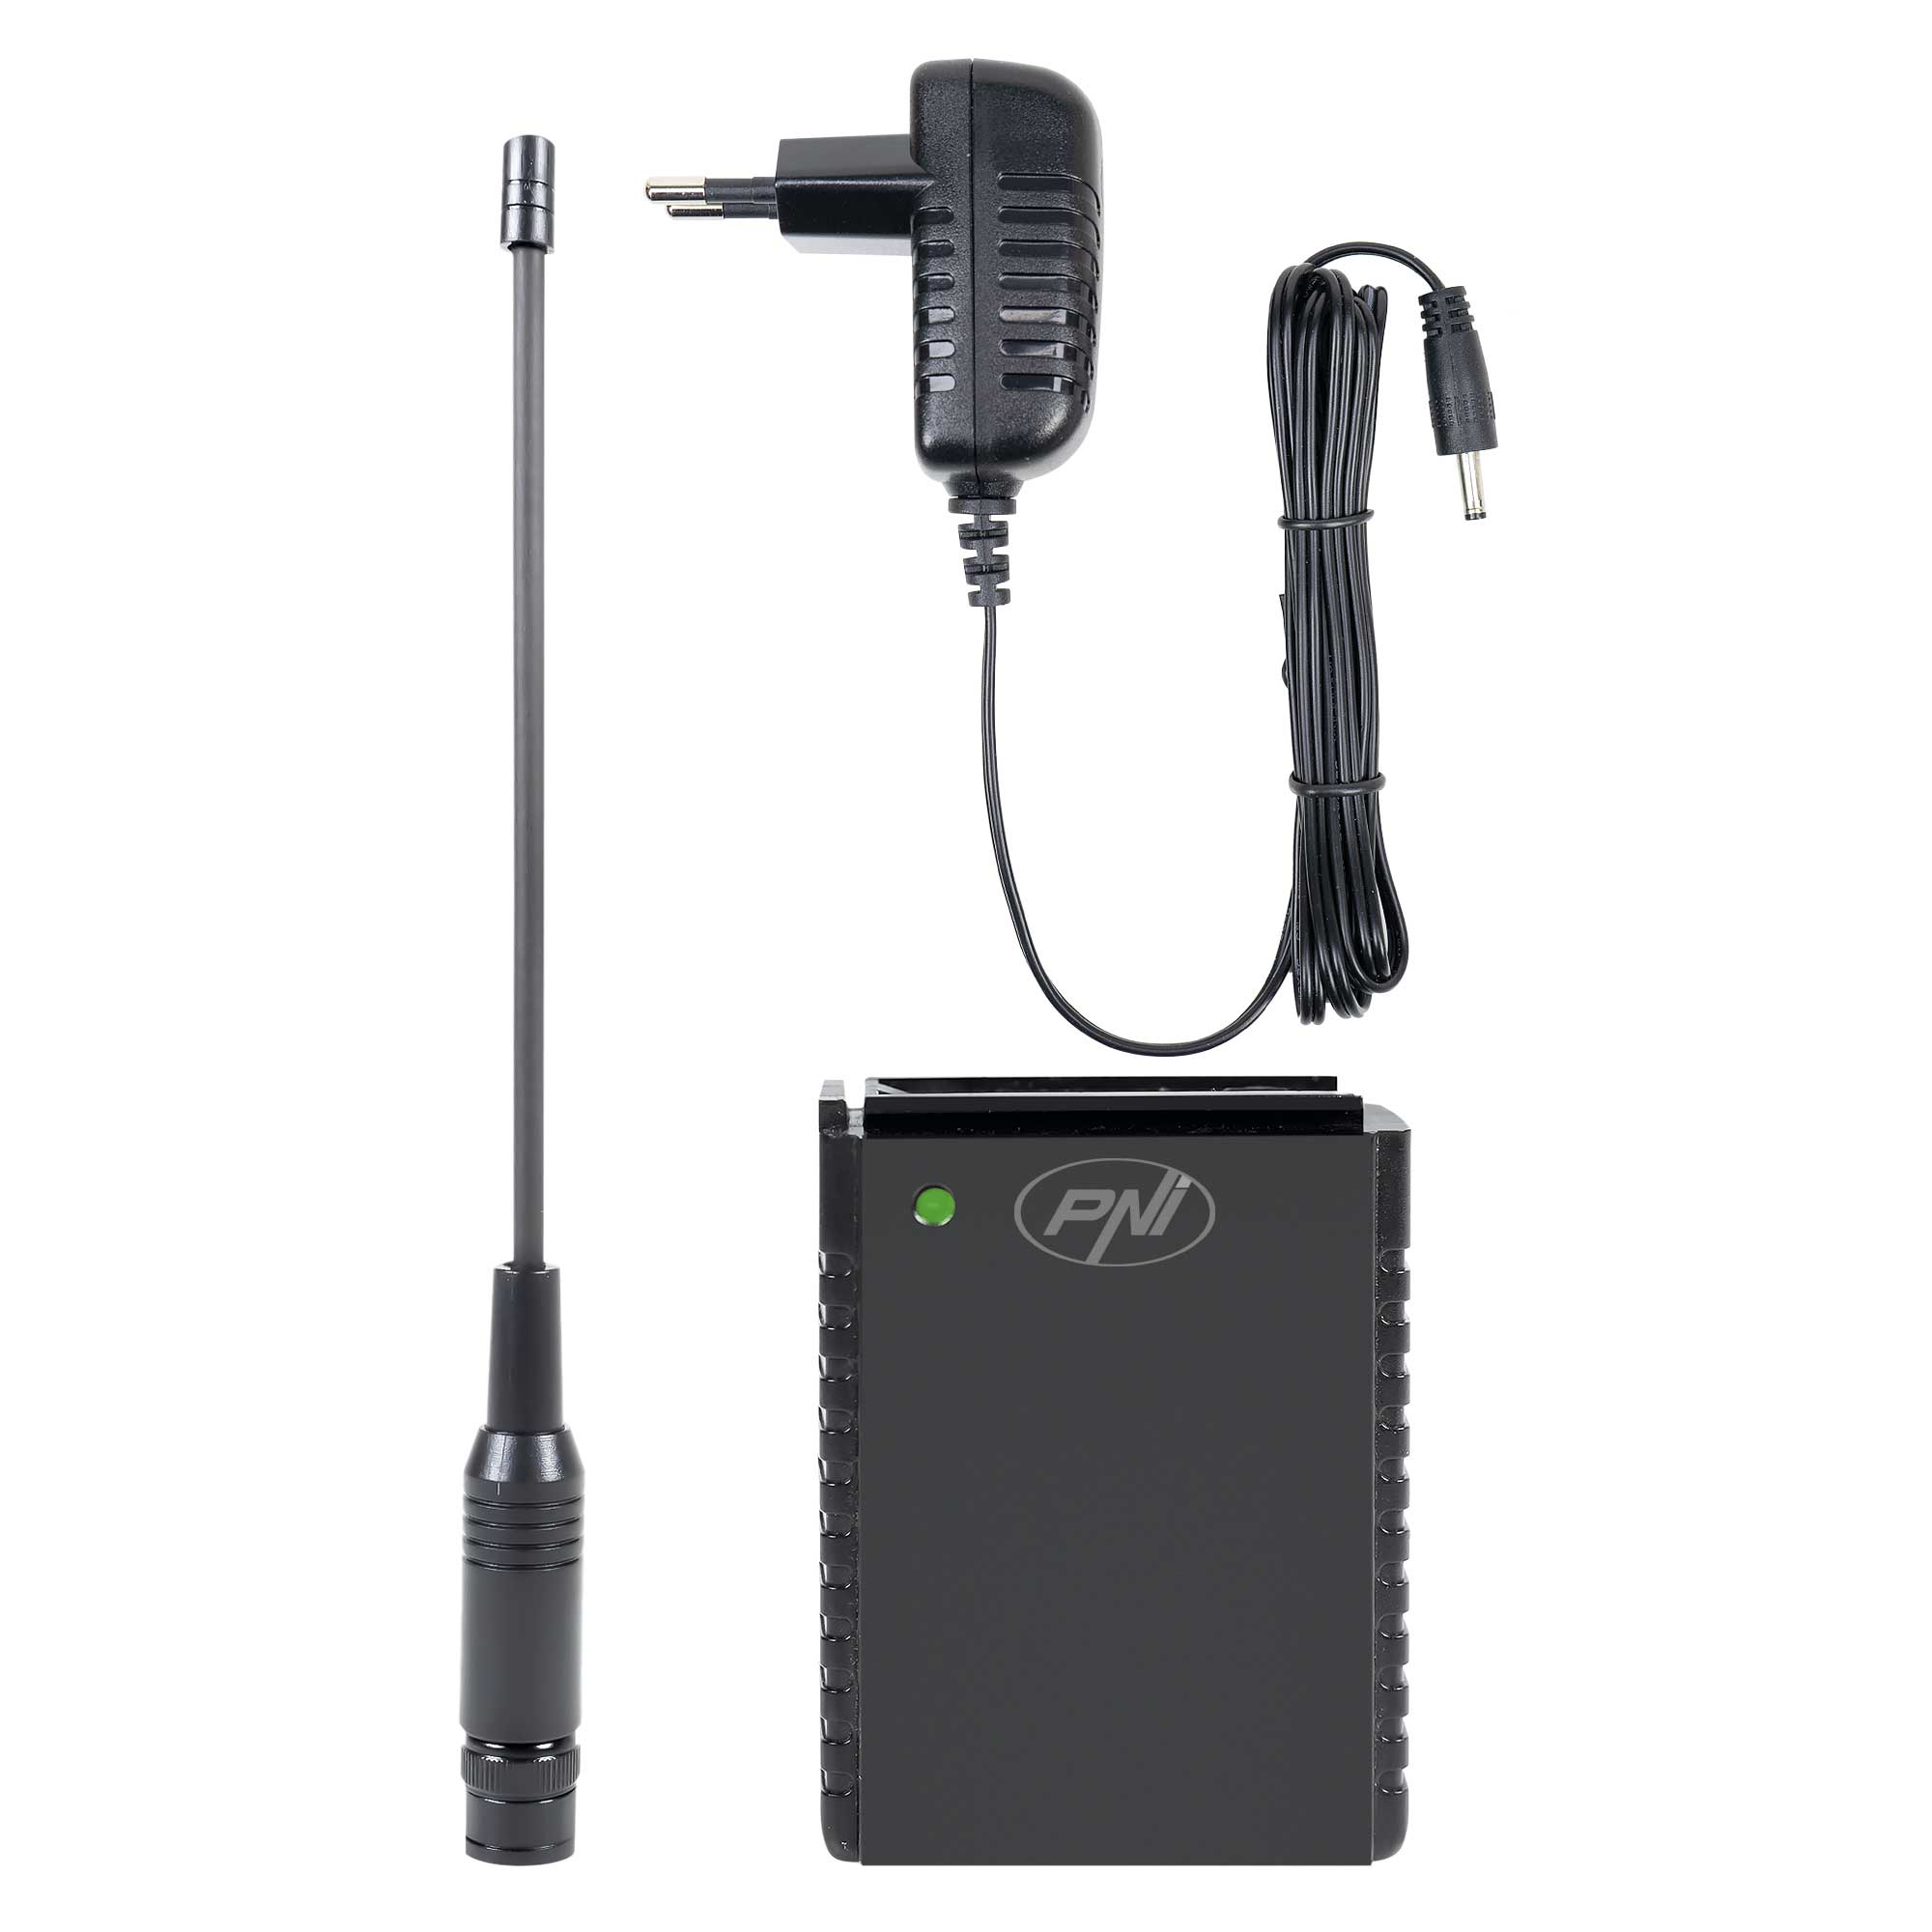 PNI HP62 accuset + antenne